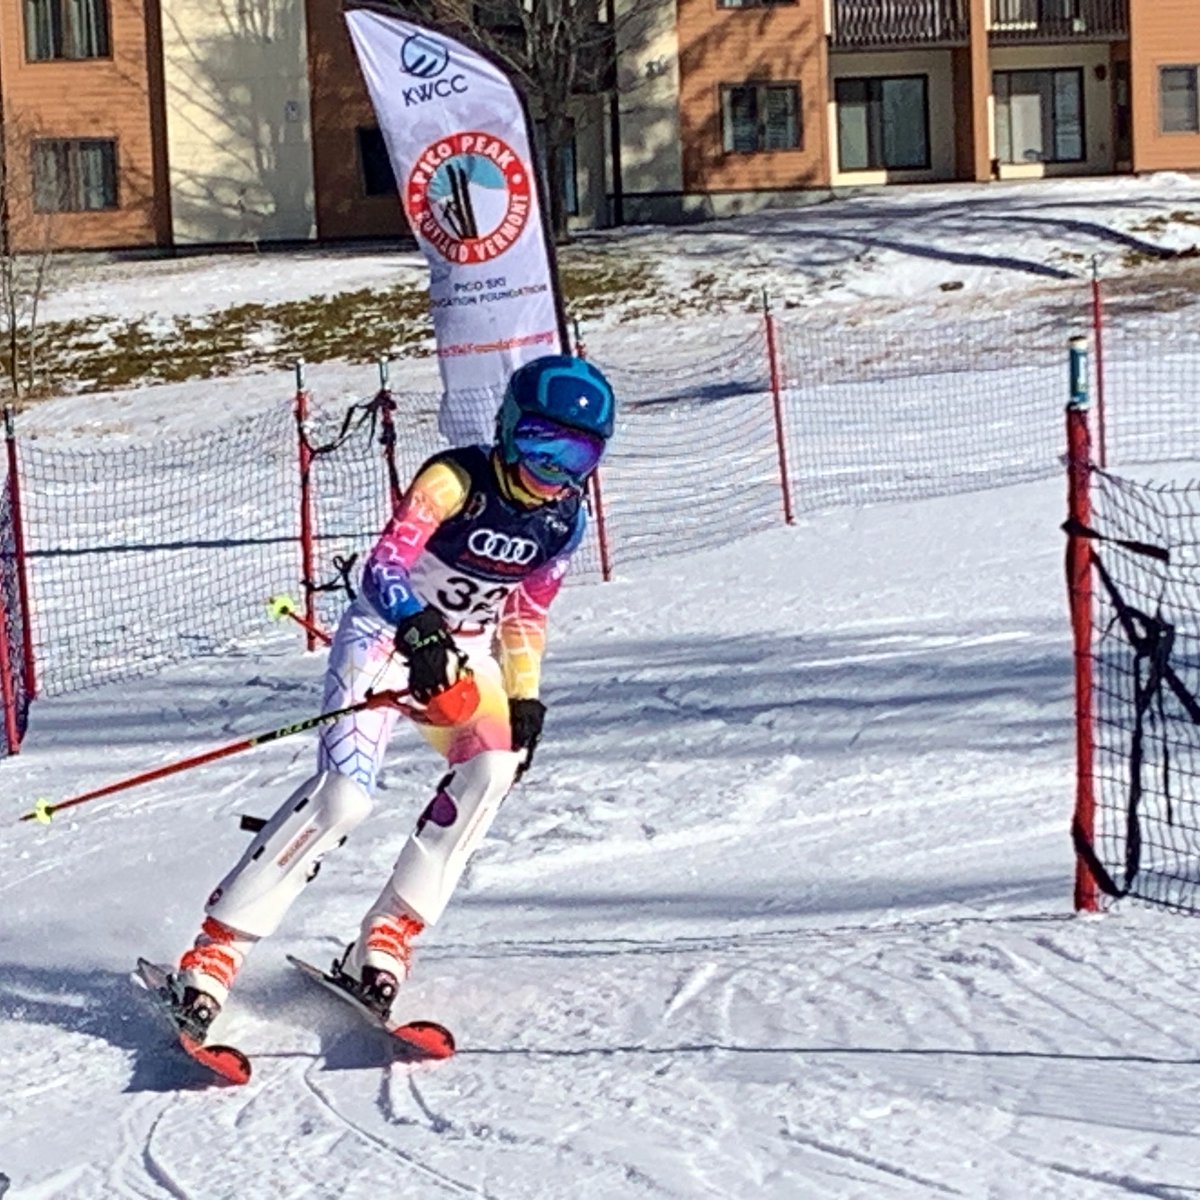 Awesome first race for my niece! Finished 22nd out of 69! #ski #skiracing #slalom #vermont #vara #snow #alpine